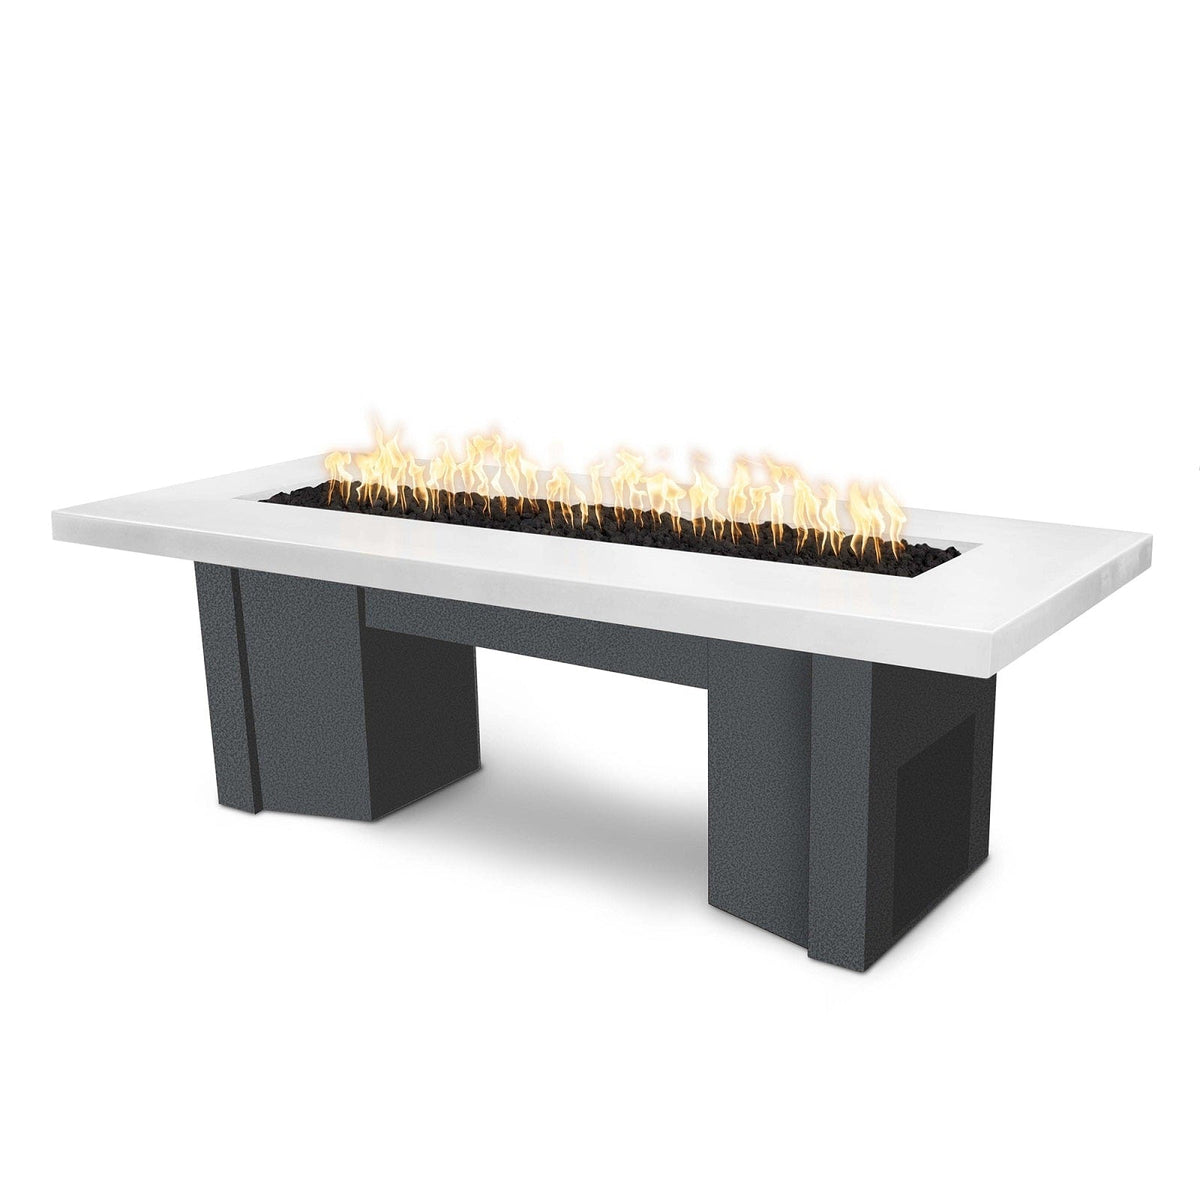 The Outdoor Plus Fire Features Limestone (-LIM) / Silver Vein Powder Coated Steel (-SLV) The Outdoor Plus 78&quot; Alameda Fire Table Smooth Concrete in Liquid Propane - Flame Sense System with Push Button Spark Igniter / OPT-ALMGFRC78FSEN-LP